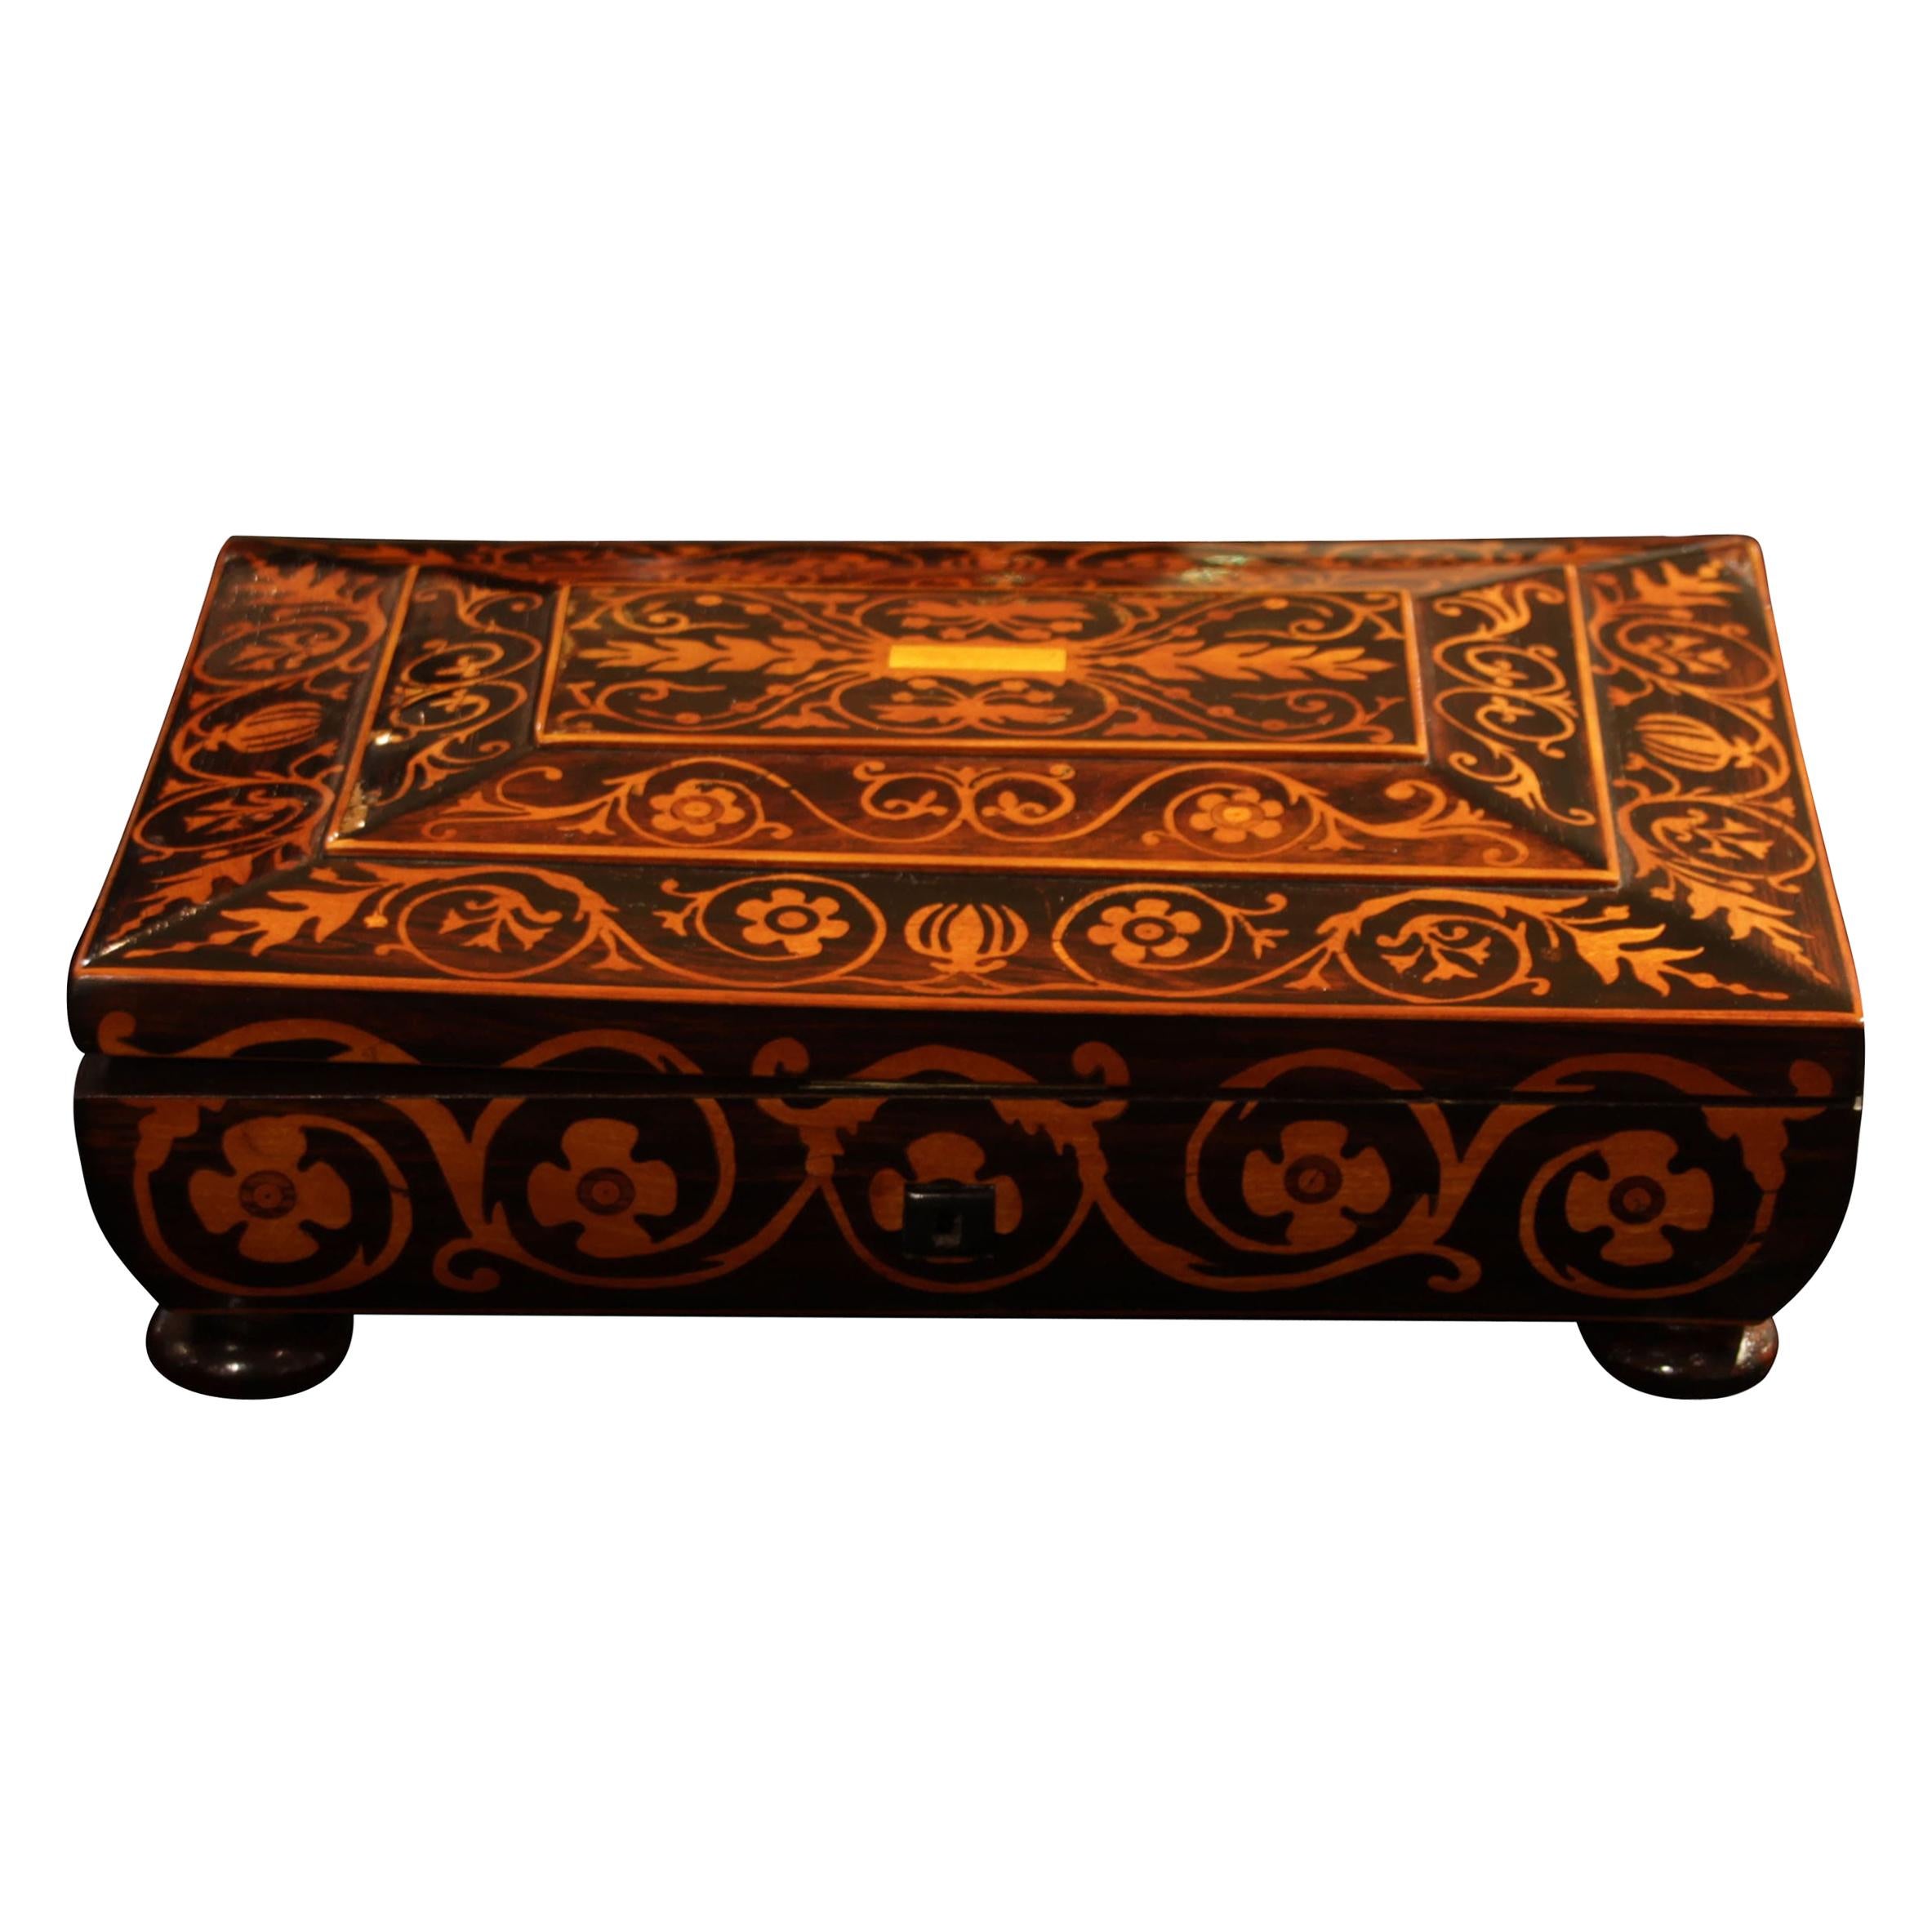 Jewelry Box, Rosewood/Maple with Floral Inlays, Vienna, circa 1860